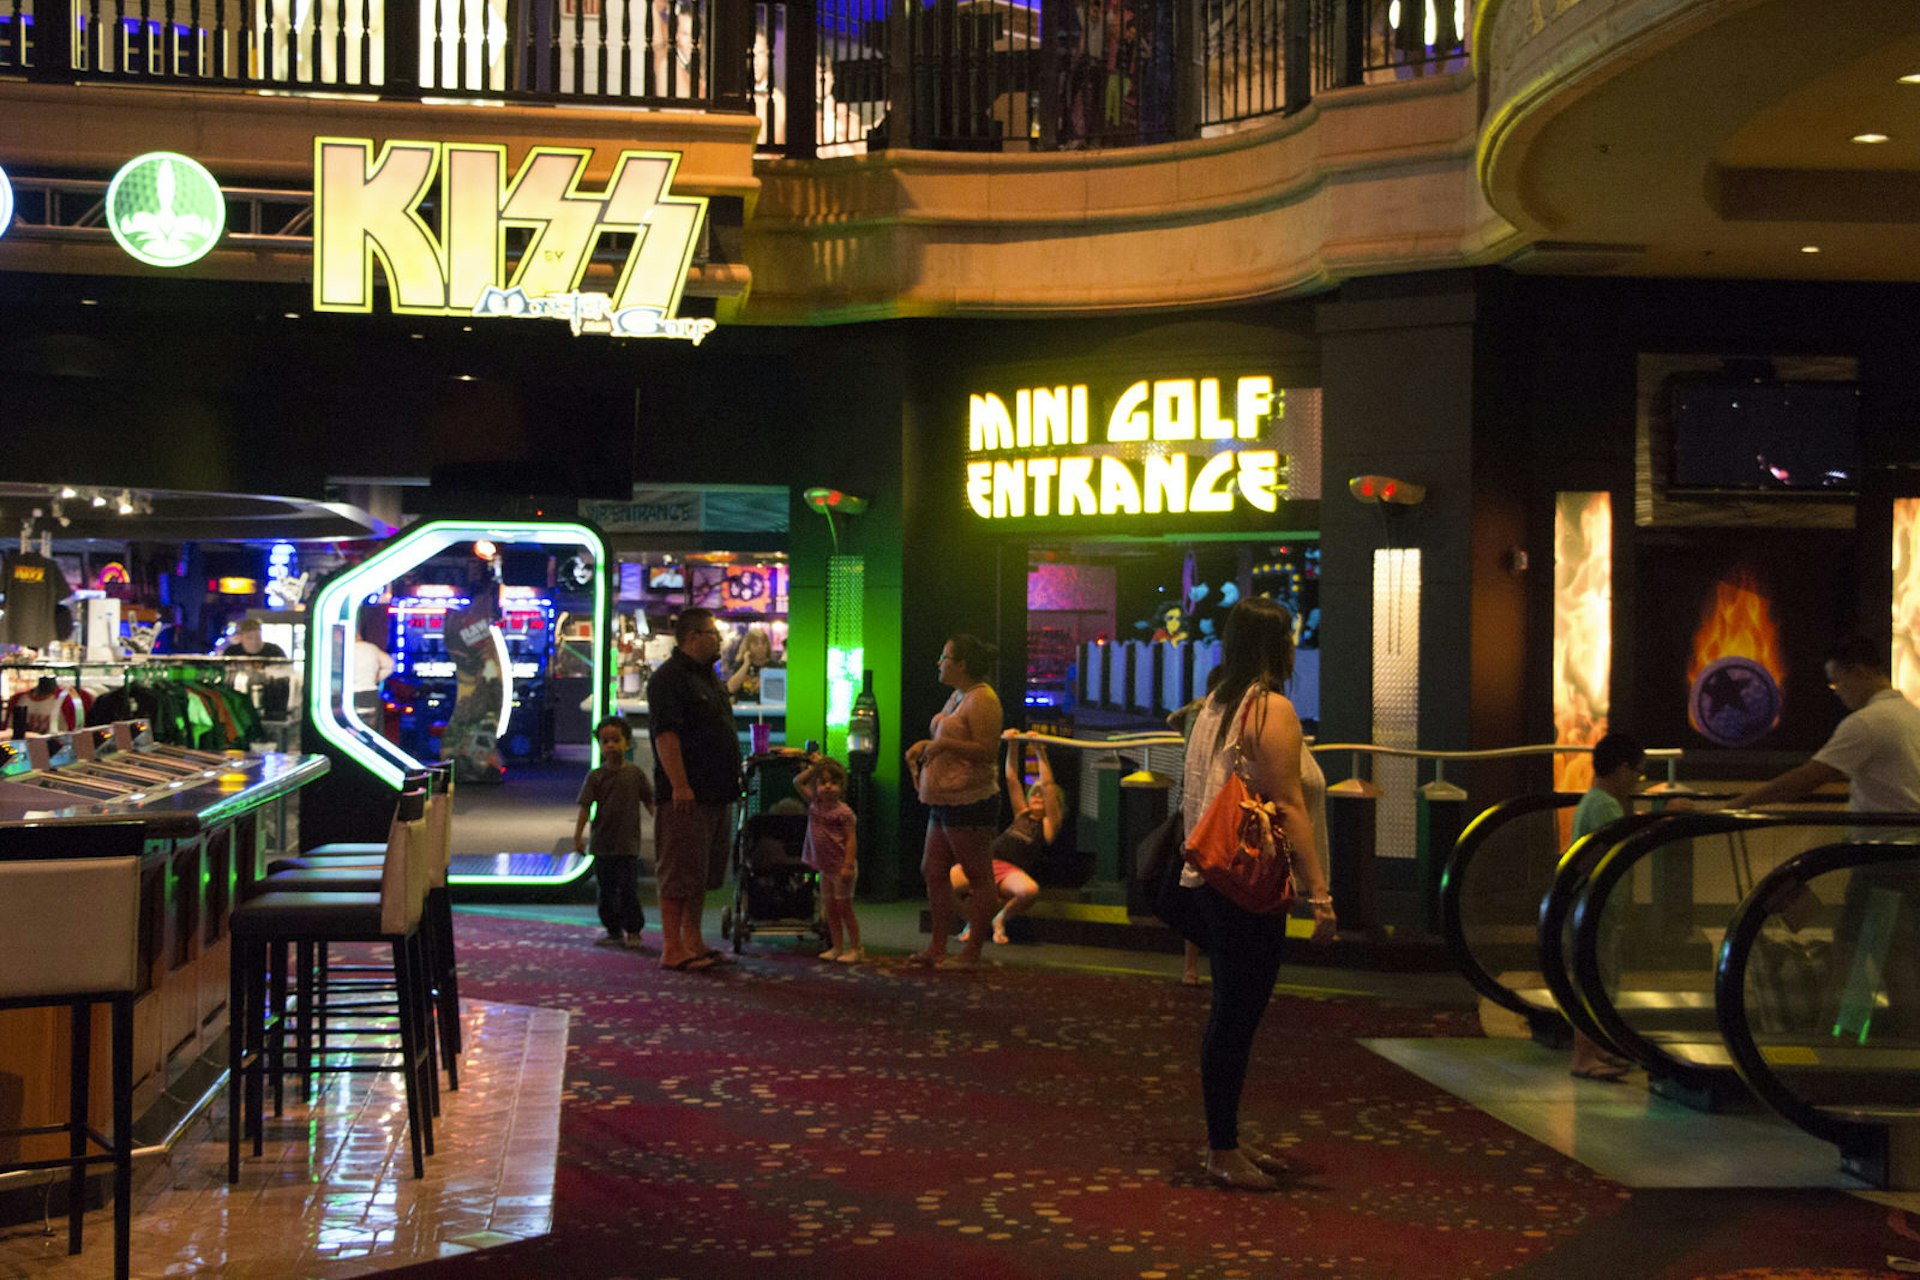 The entrance to an indoor mini golf venue is seen, with multi-colored lights all around and the logo of the heavy metal band KISS spelled out in bright light bulbs. © Greg Thilmont / Lonely Planet